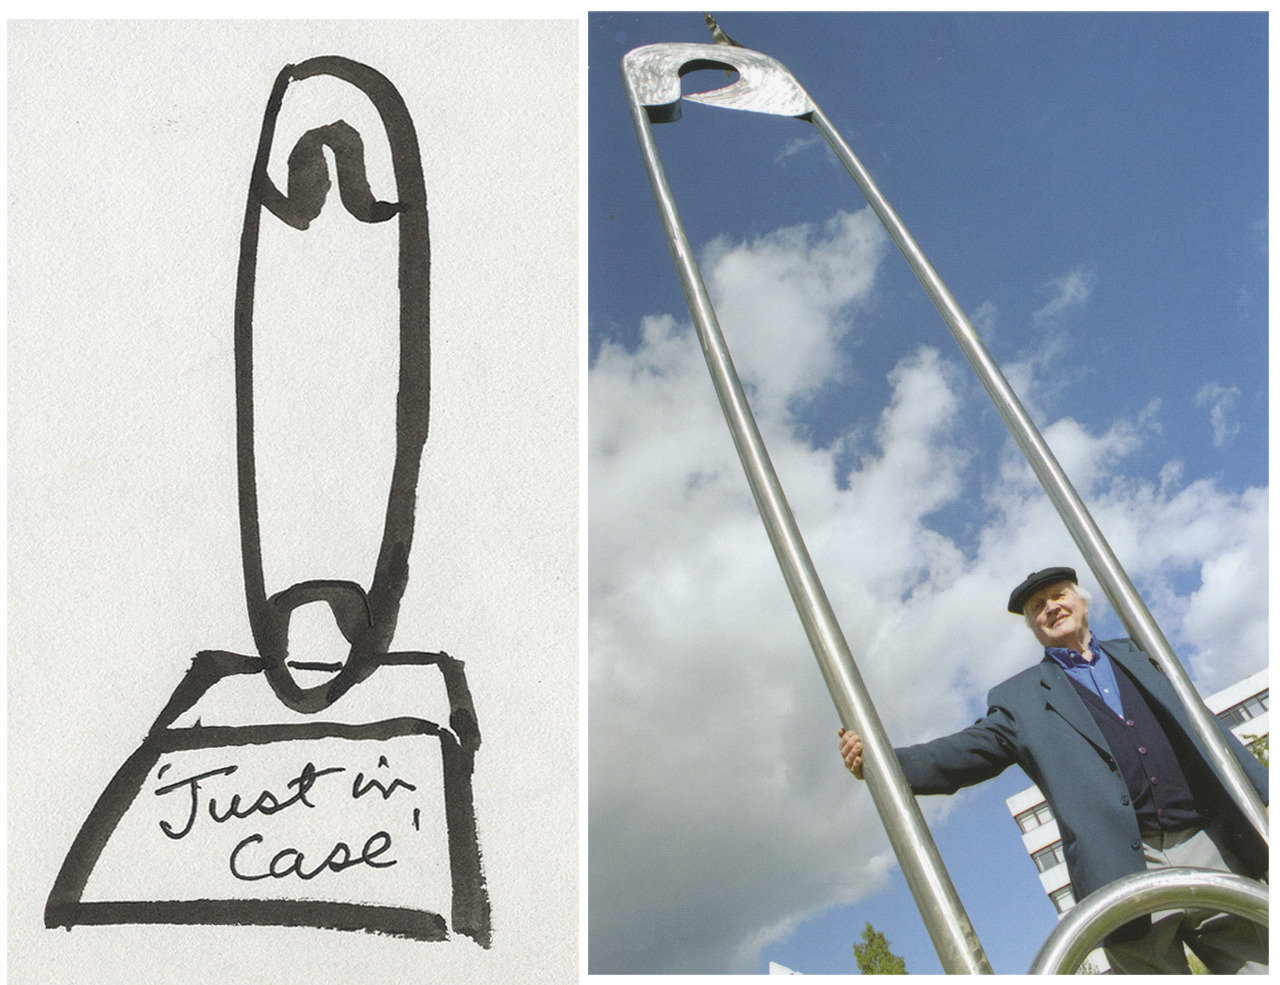 Sketch and photograph of George Wyllie with Monument to Maternity sculpture